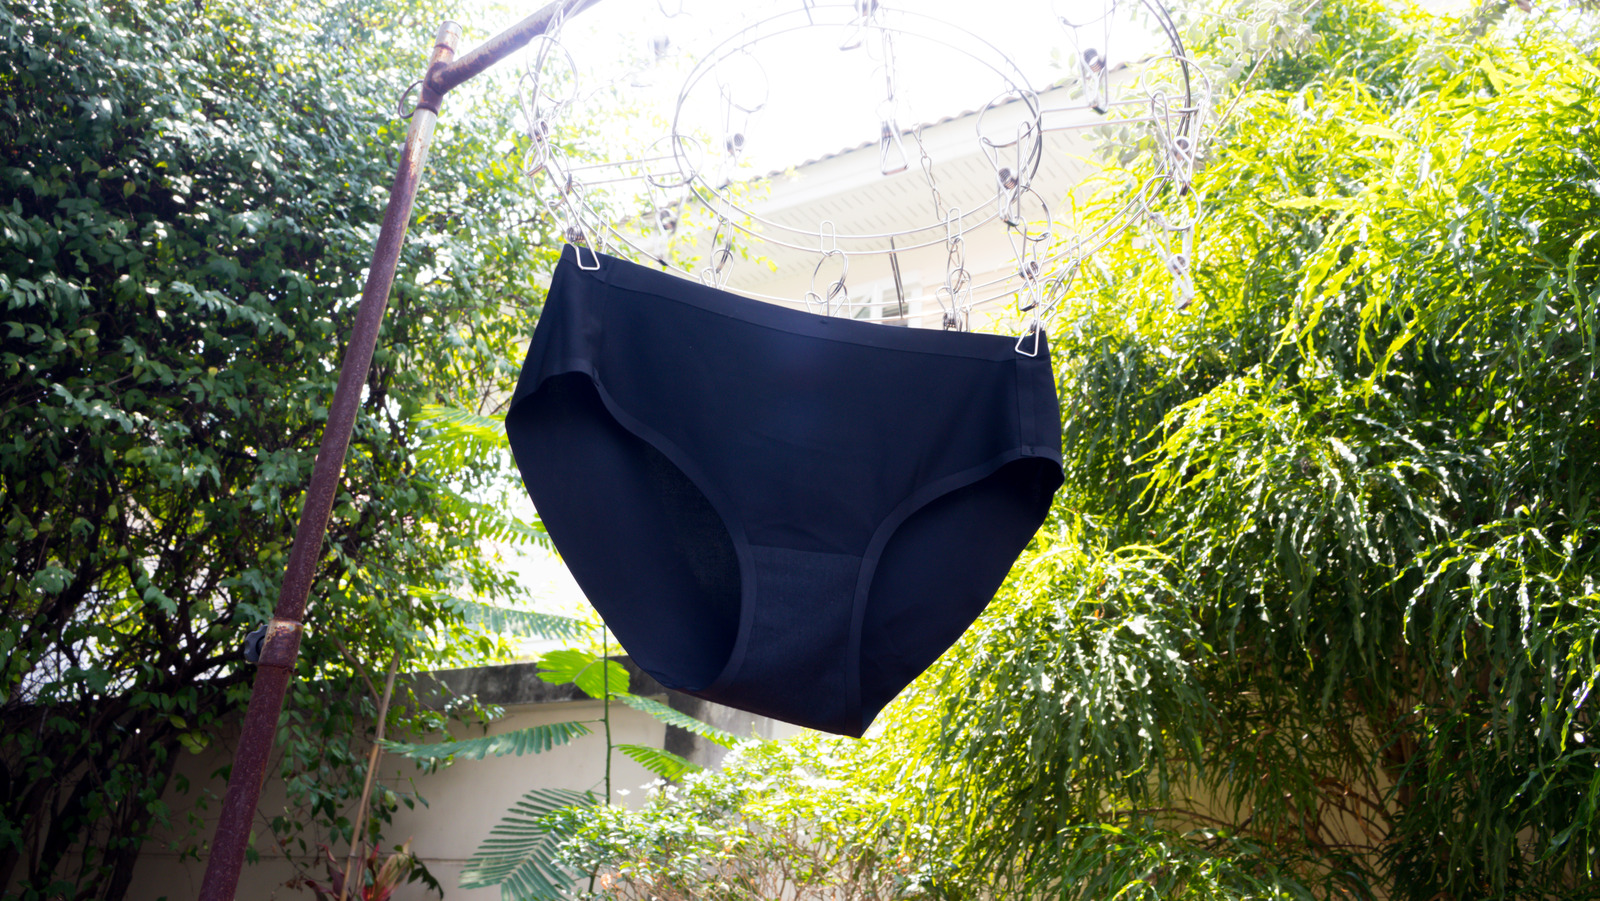 The Weird Gardening Hack That Uses A Pair Of Underwear To Test Soil